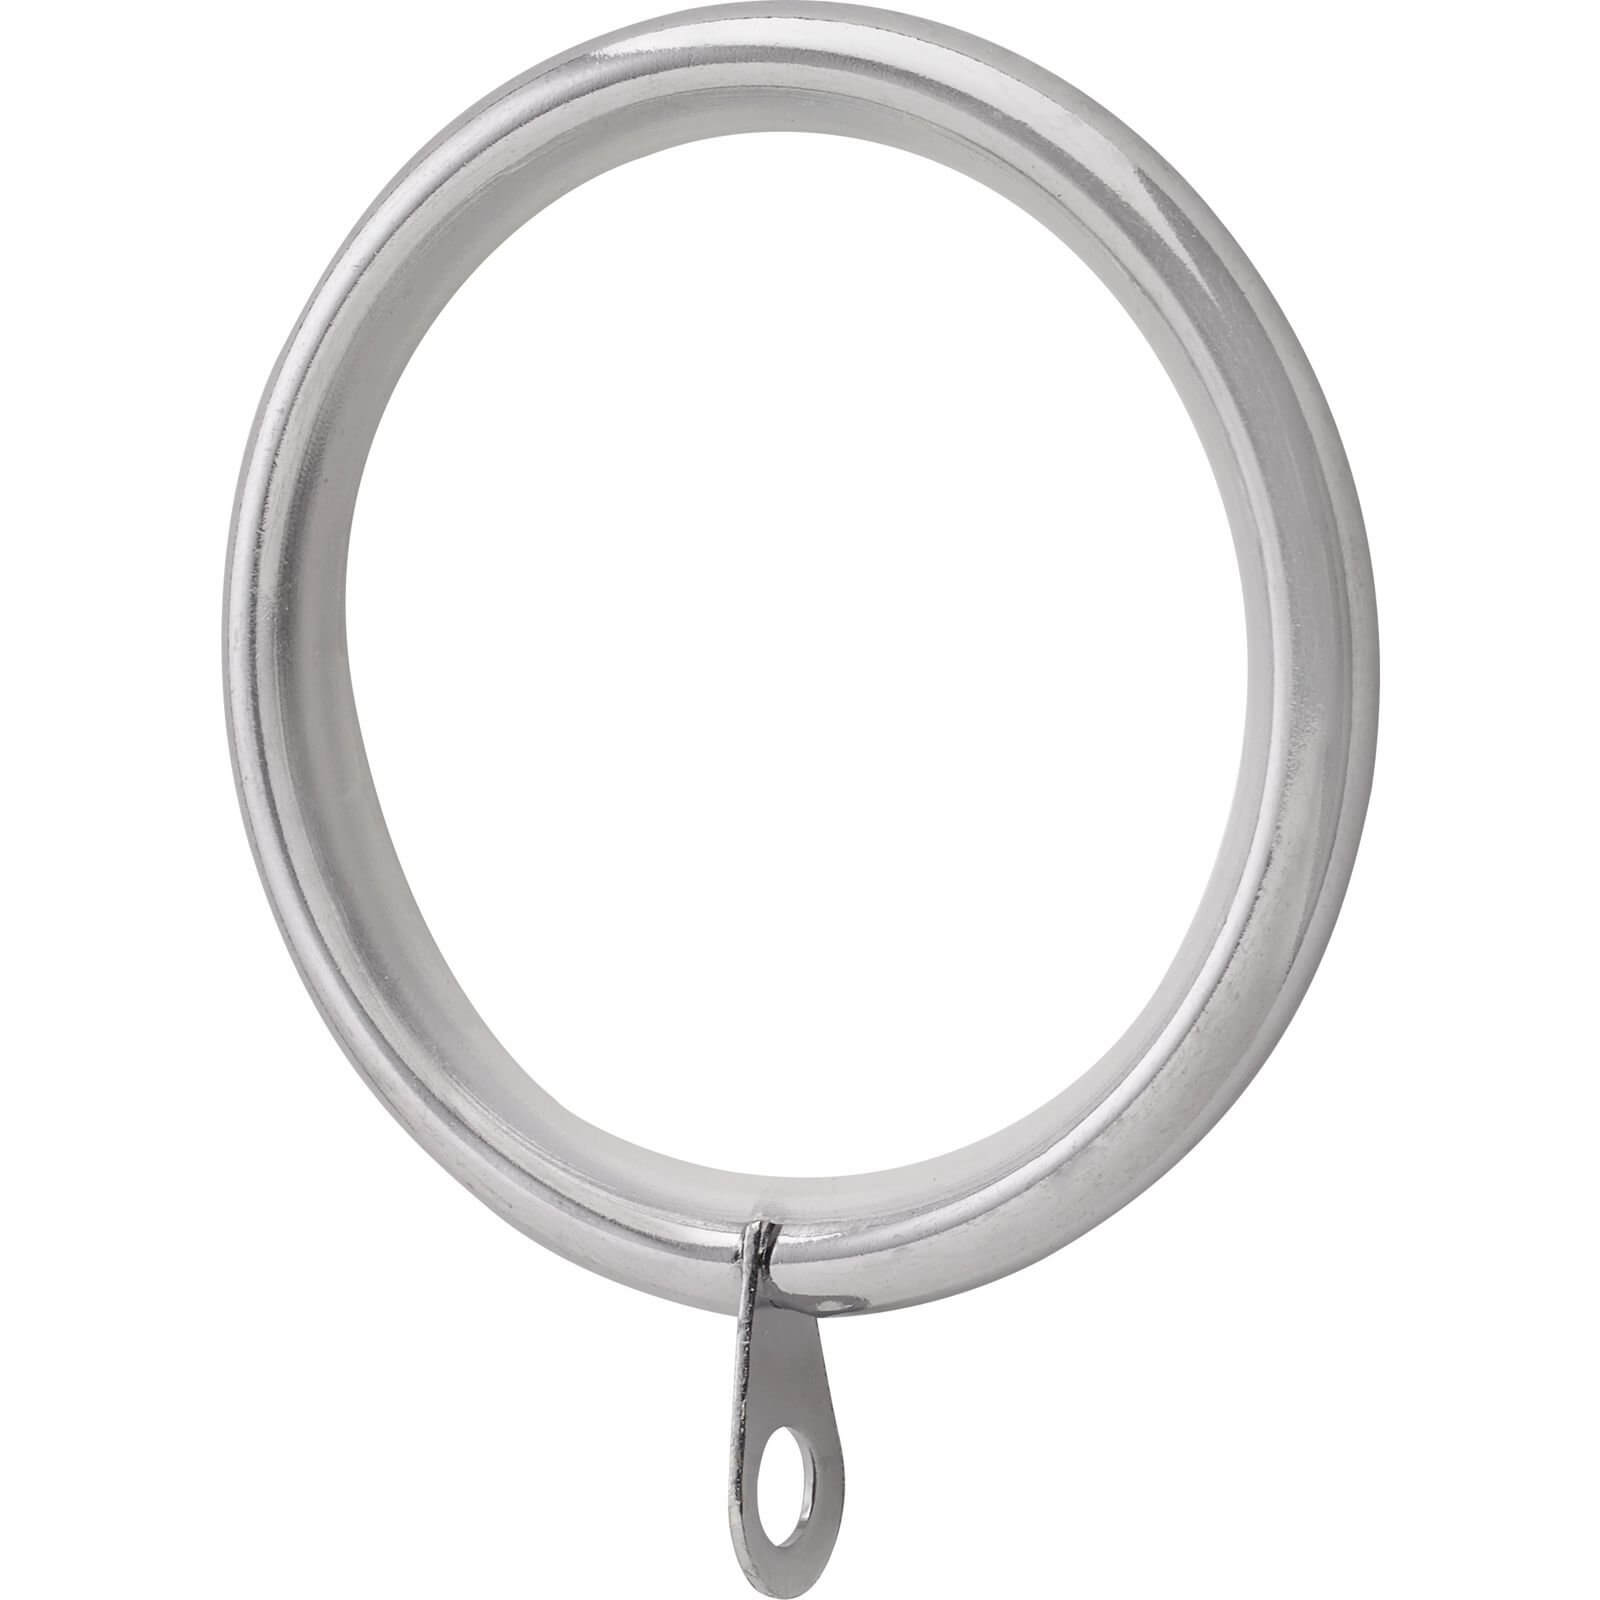 Chrome 28mm Curtain Rings 4 pack